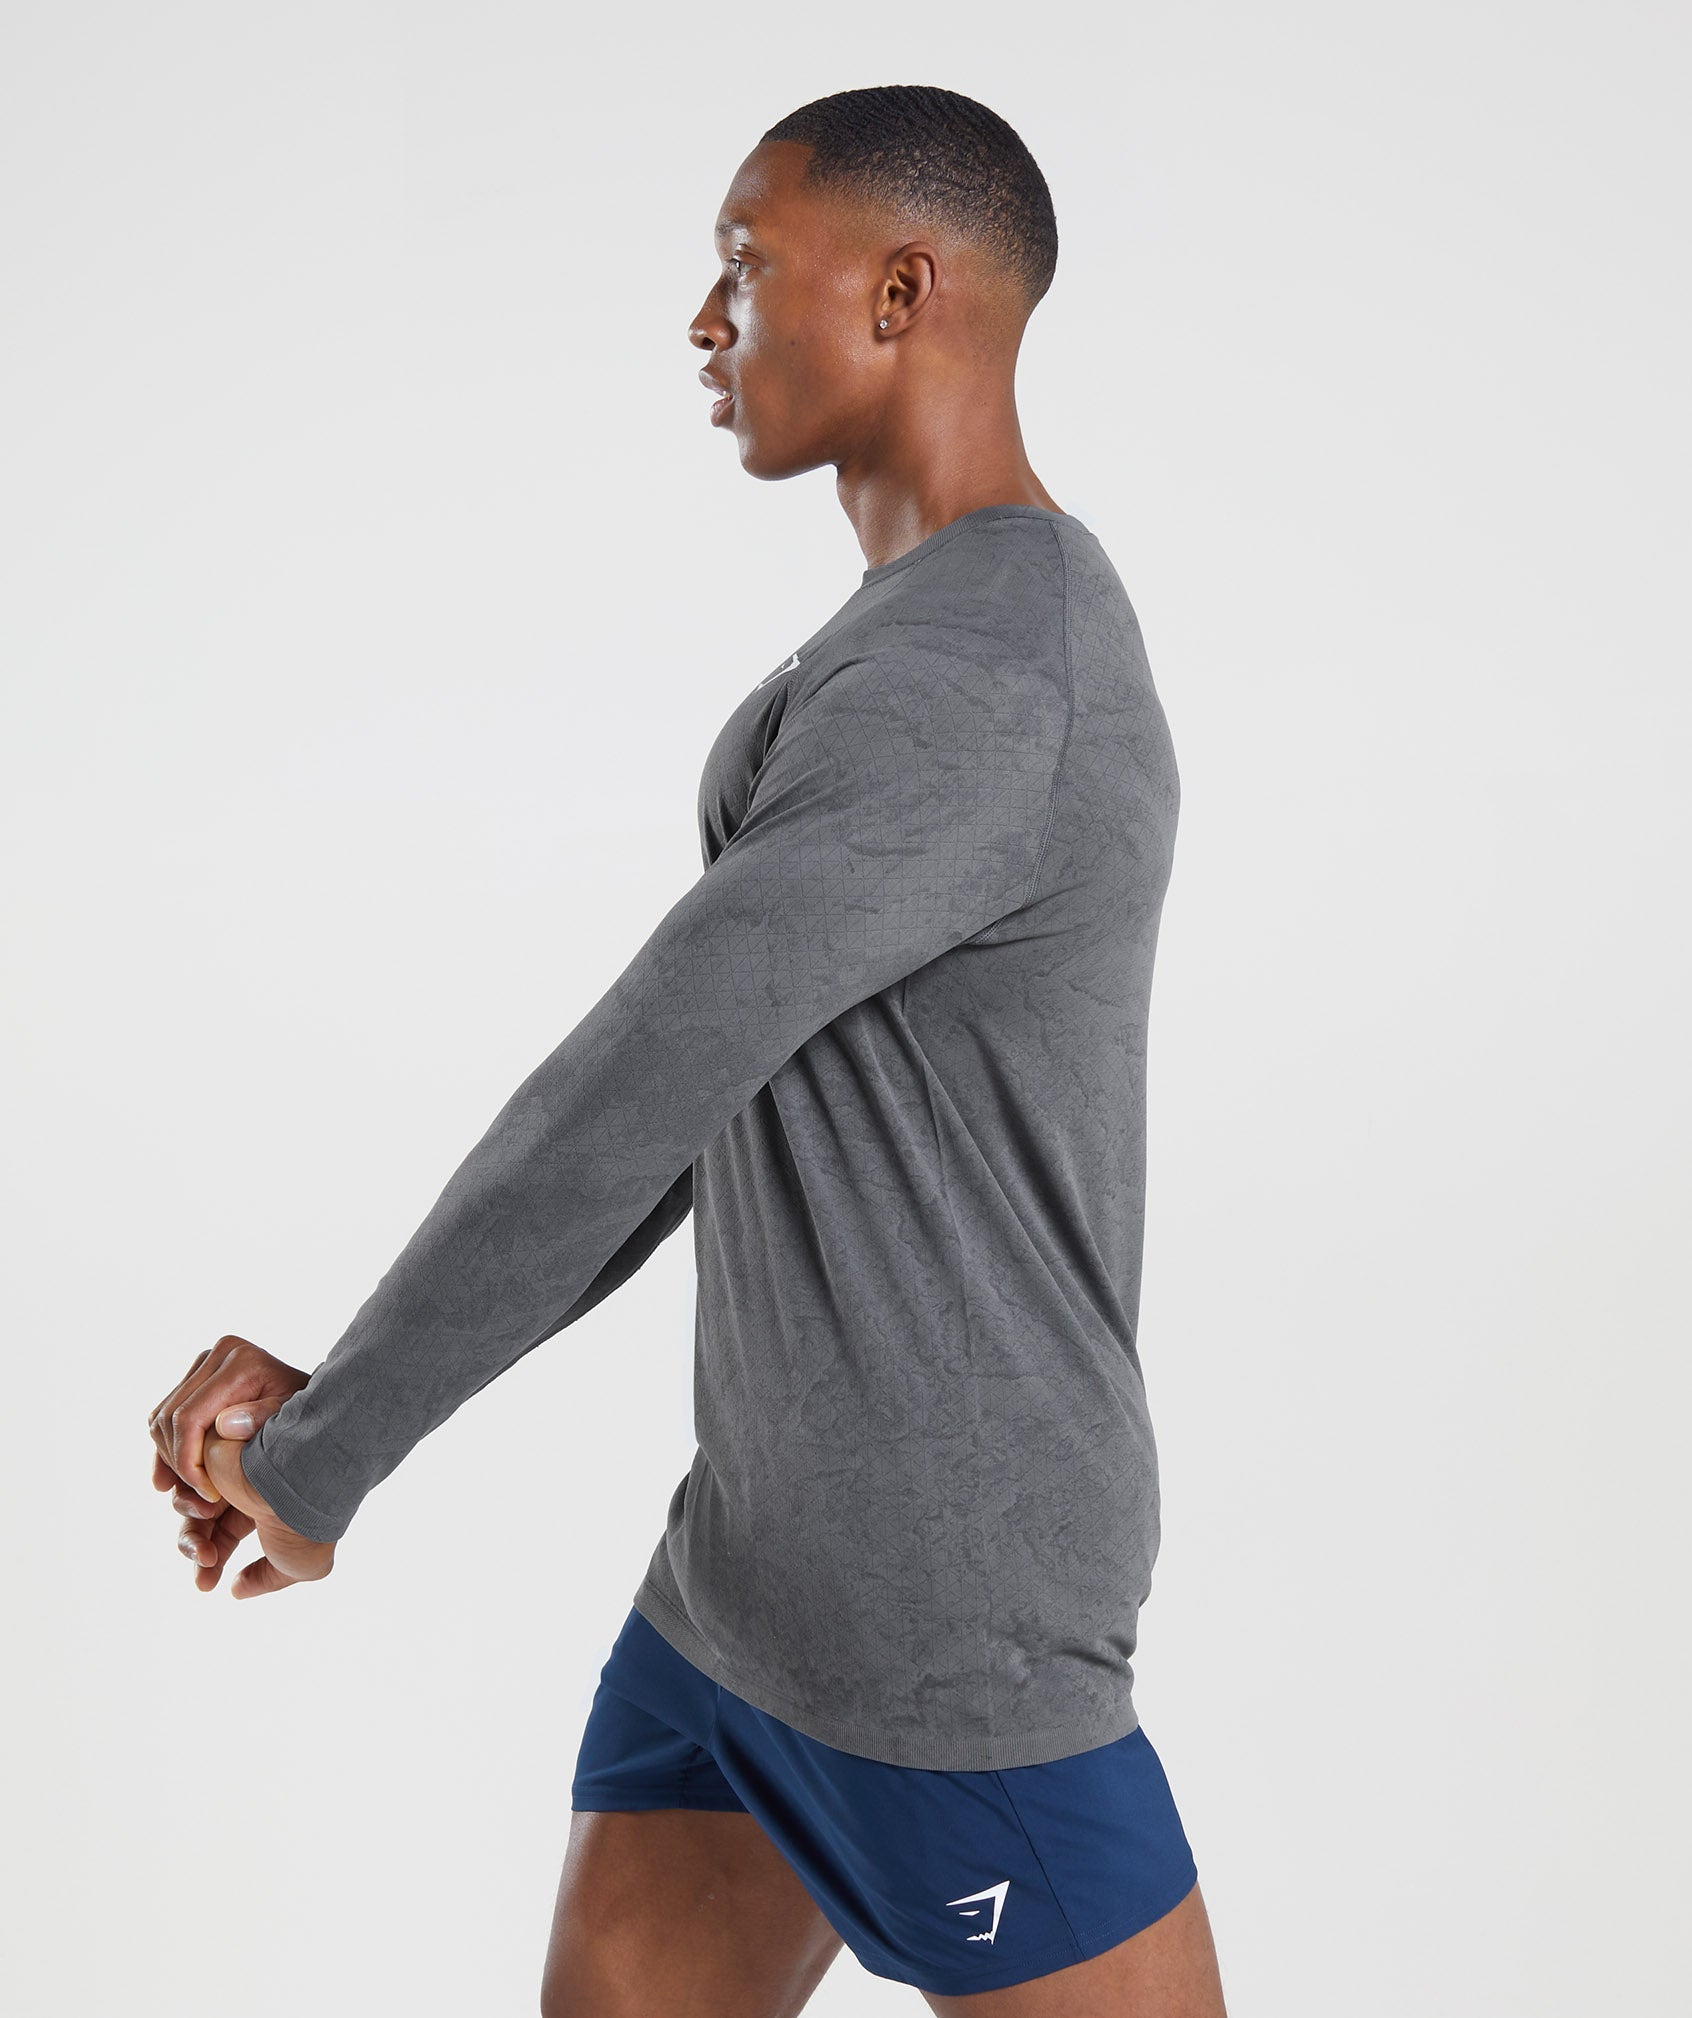 Geo Seamless Long Sleeve T-Shirt in Charcoal Grey/Black - view 3